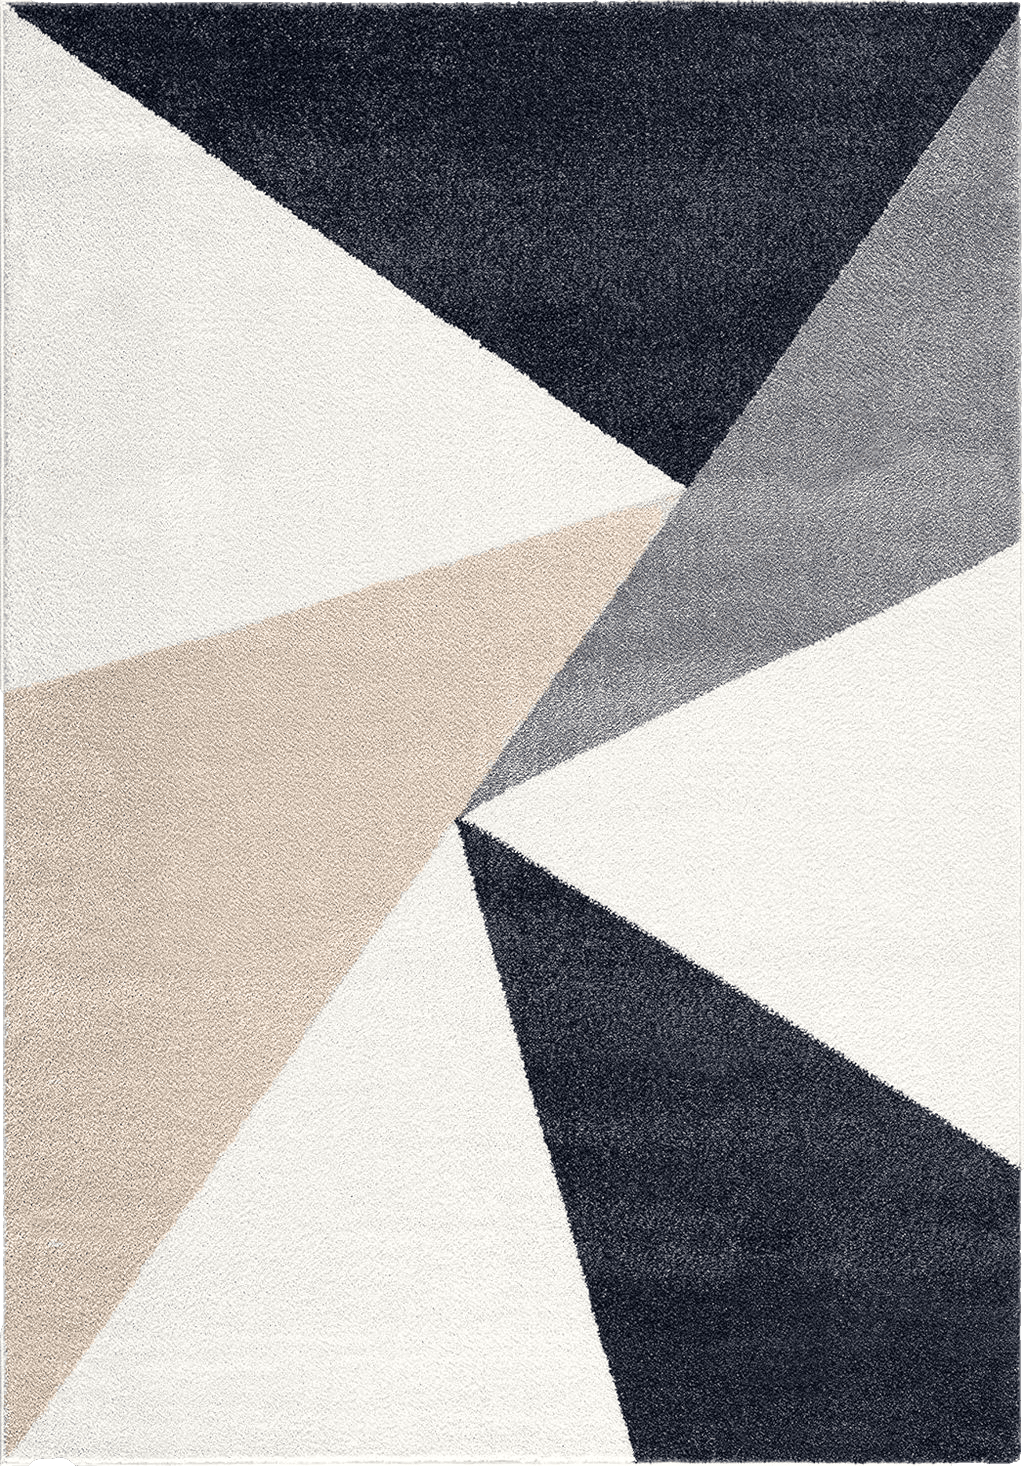 Abani Rugs Gray, Cream and Beige 4 ft. X 6ft. Contemporary Rug. Repeated Triangles in Tones of Cream and Gray Inspired by mid-Century Design. Minimalistic Design Turkish Stain Resistant Area Rug.